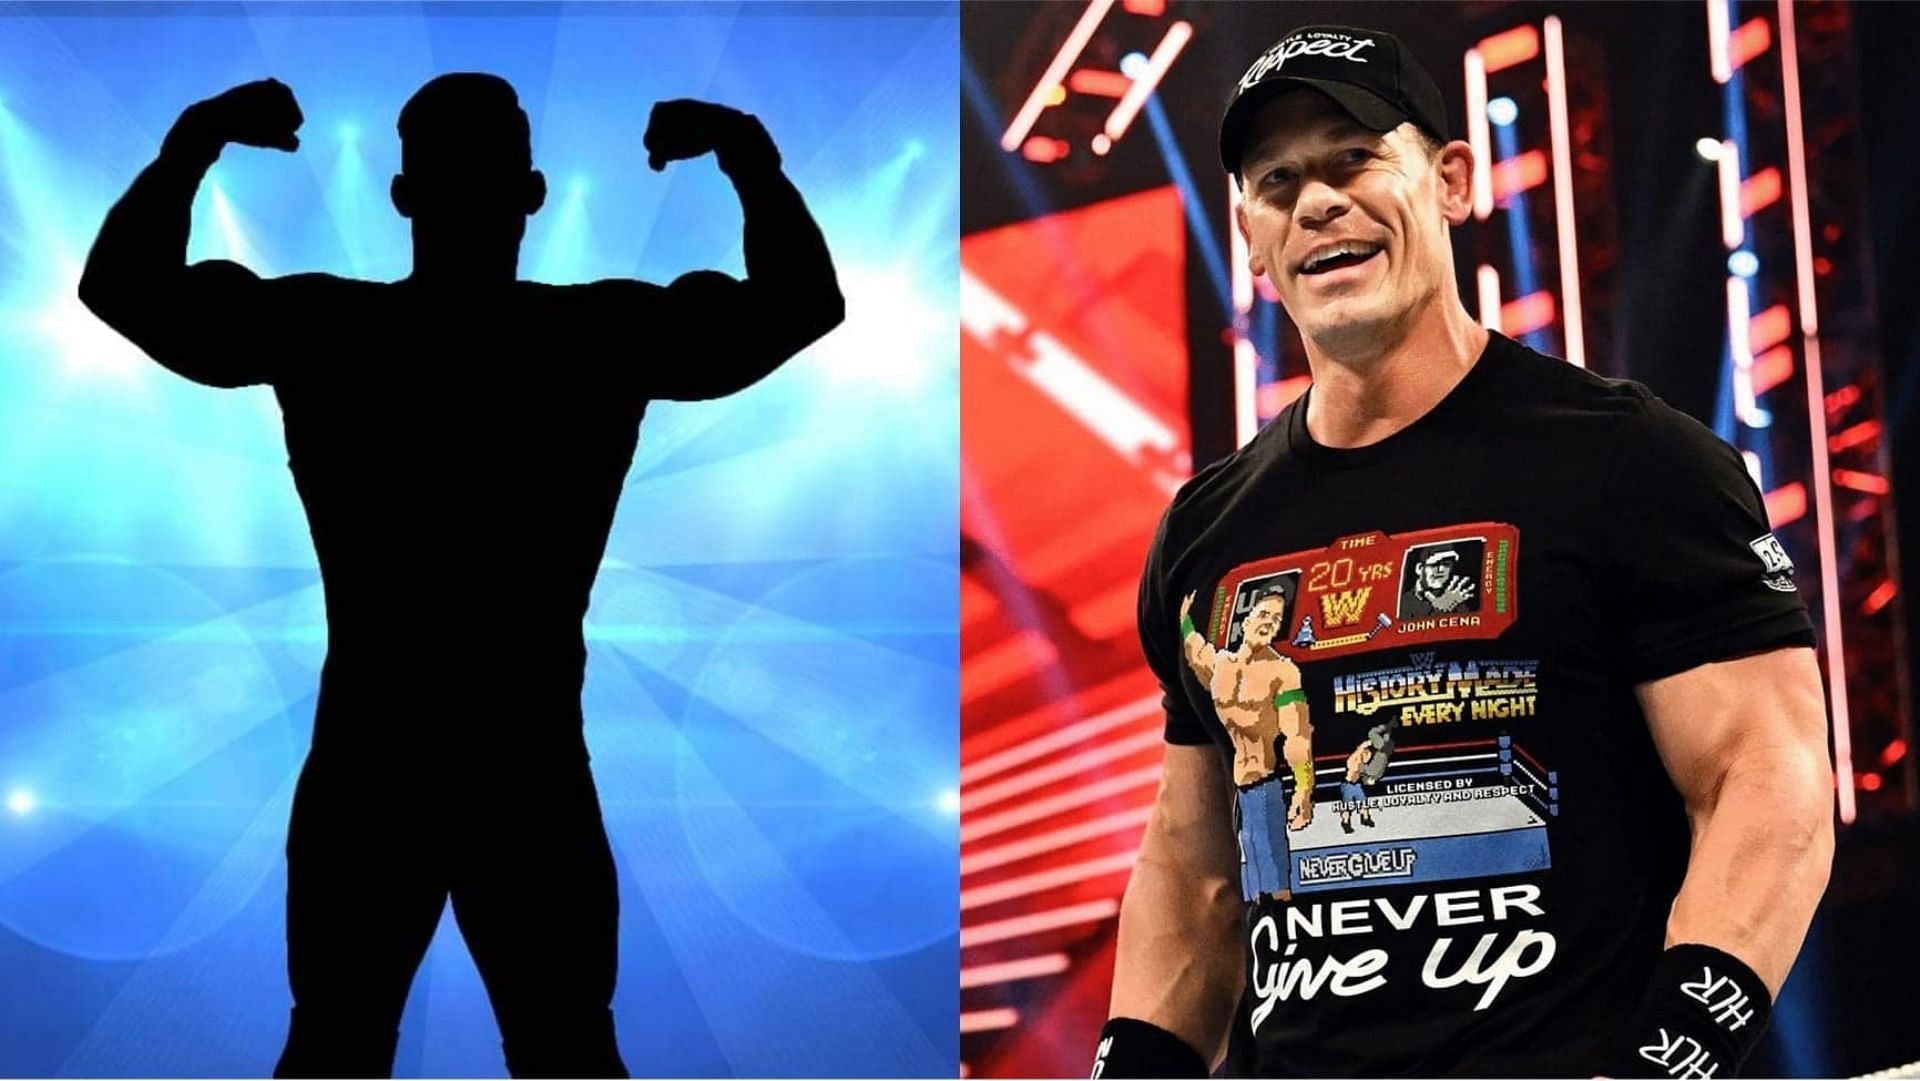 John Cena is a 16 time world champion in WWE.